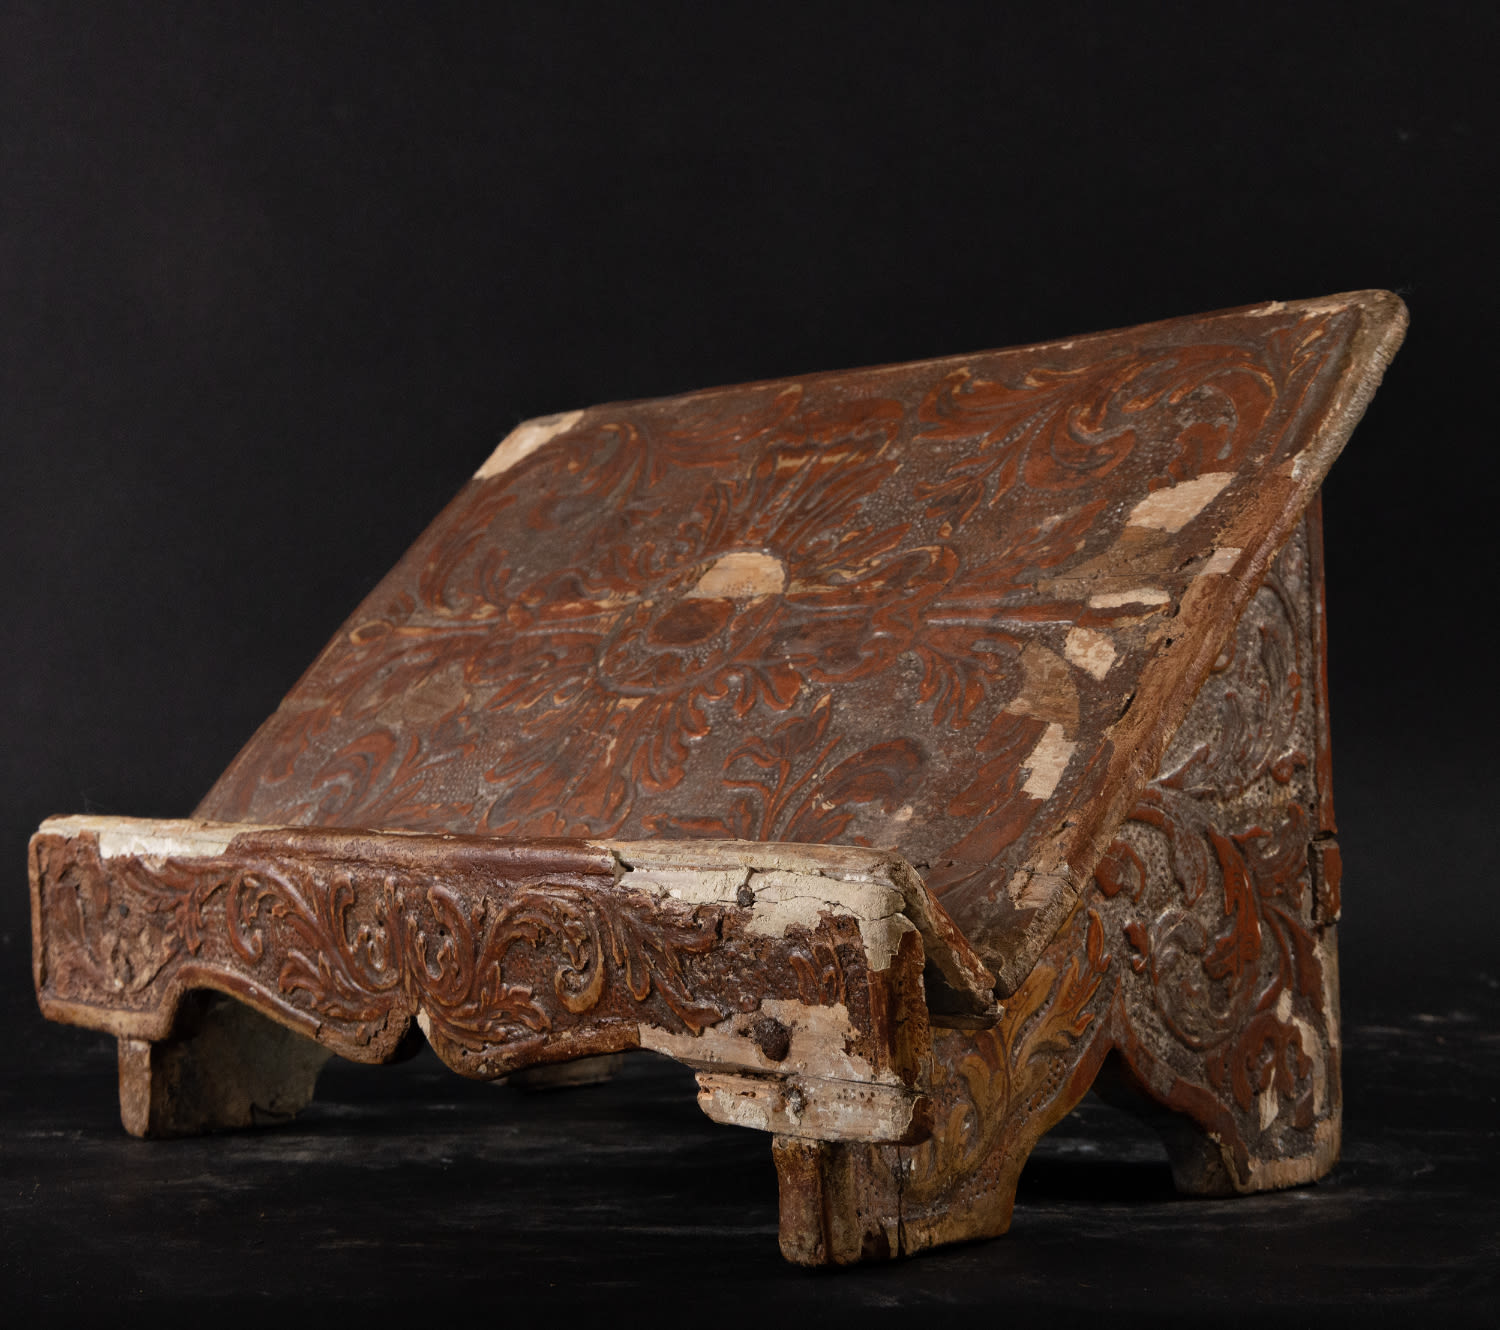 Plateresque Lectern in wood covered in Embossed Leather, 16th century - Image 2 of 4